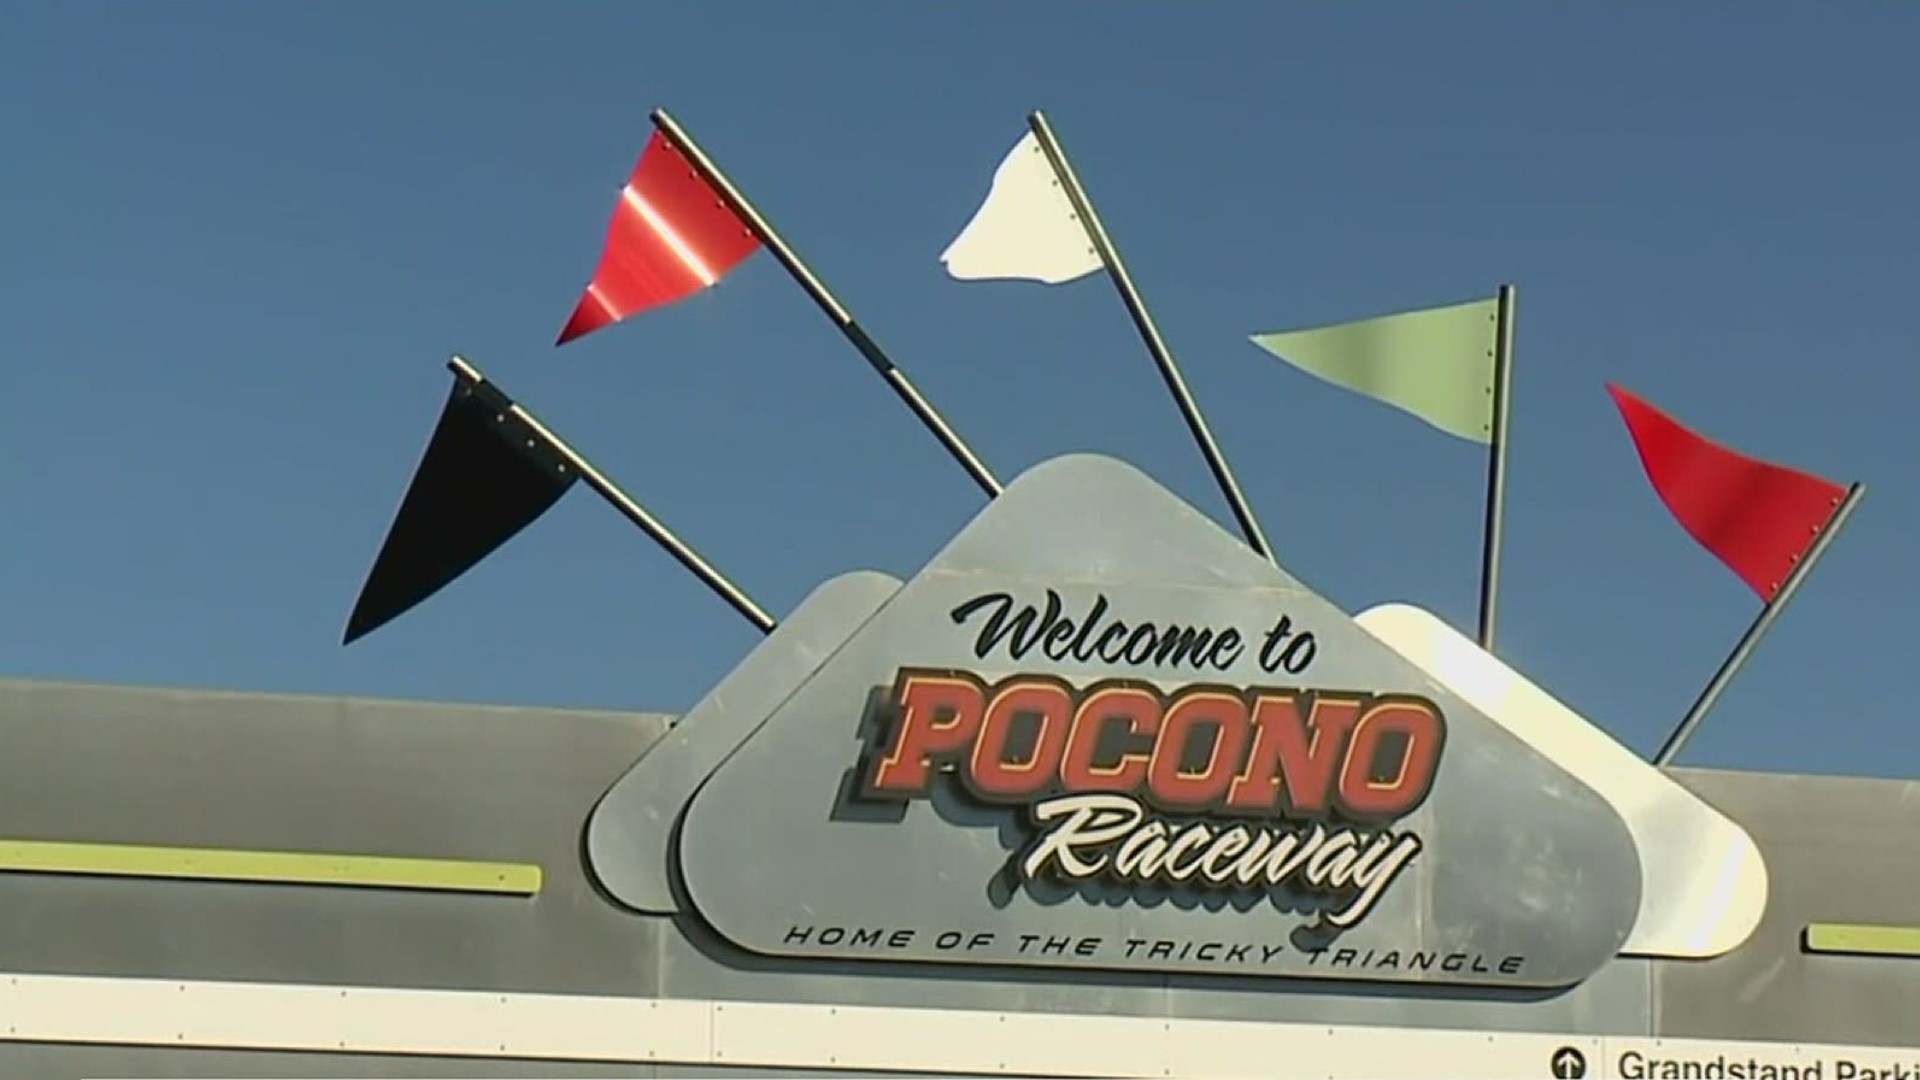 After PA lifted all outdoor restrictions on Memorial Day, Pocono Raceway announced it’ll return this summer at 100%.